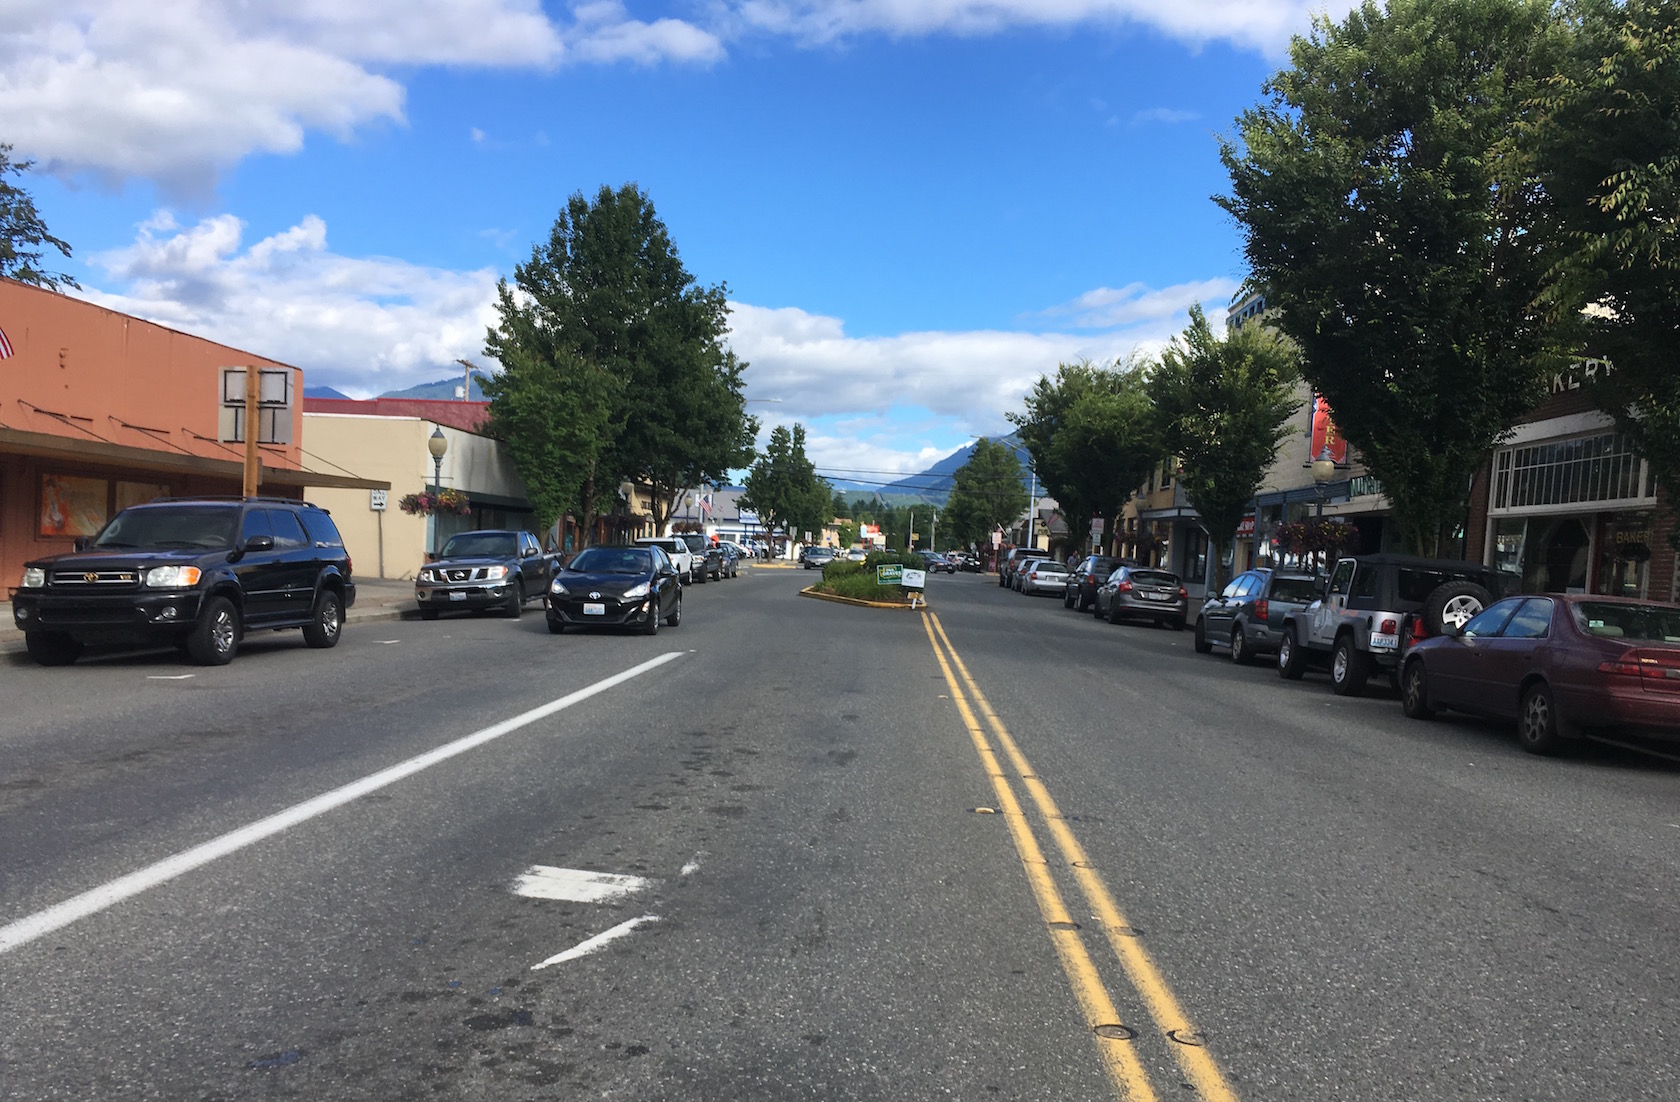 Main Street, North Bend - at least 4 Season 3 locations are in this first block